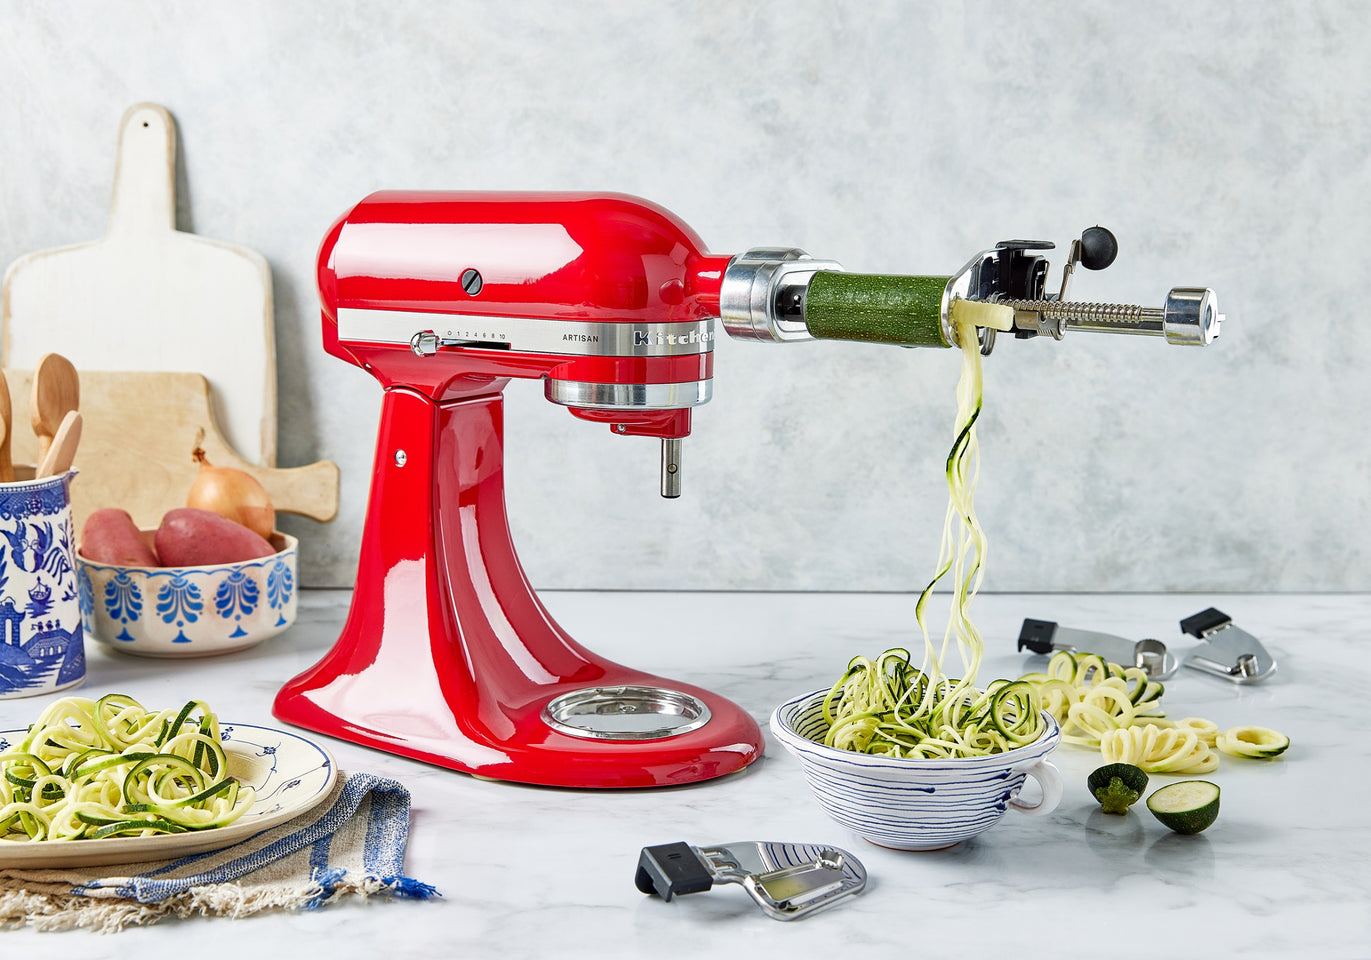 Kitchenaid Spiralizer Attachment With Peel, Core And Slice